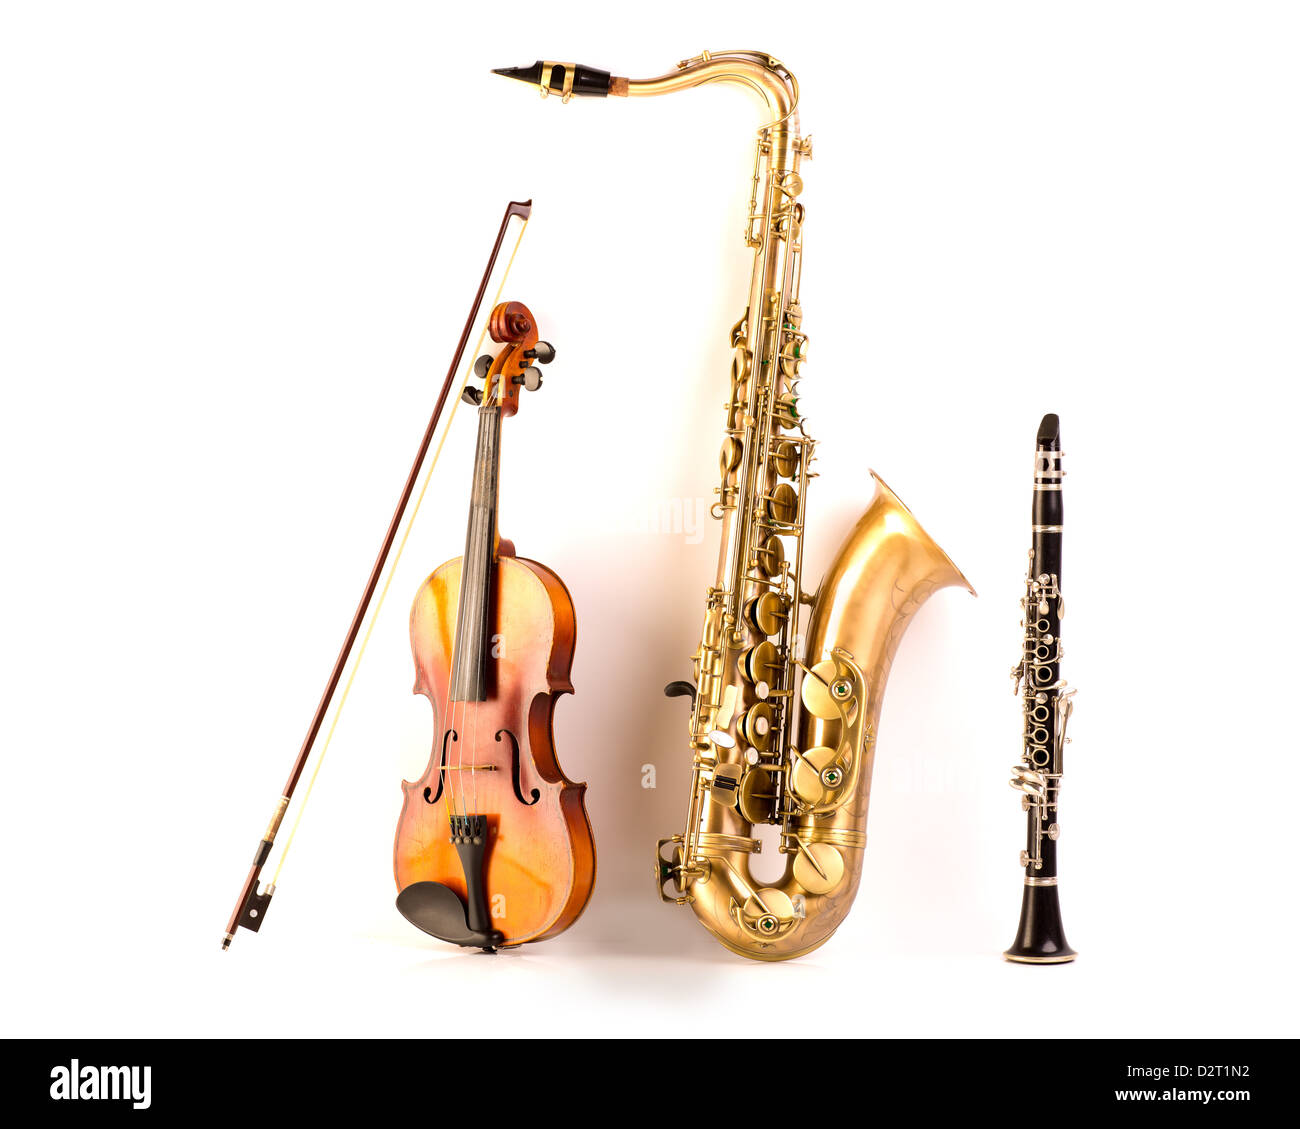 Music Sax tenor saxophone violin and clarinet in white background Stock Photo